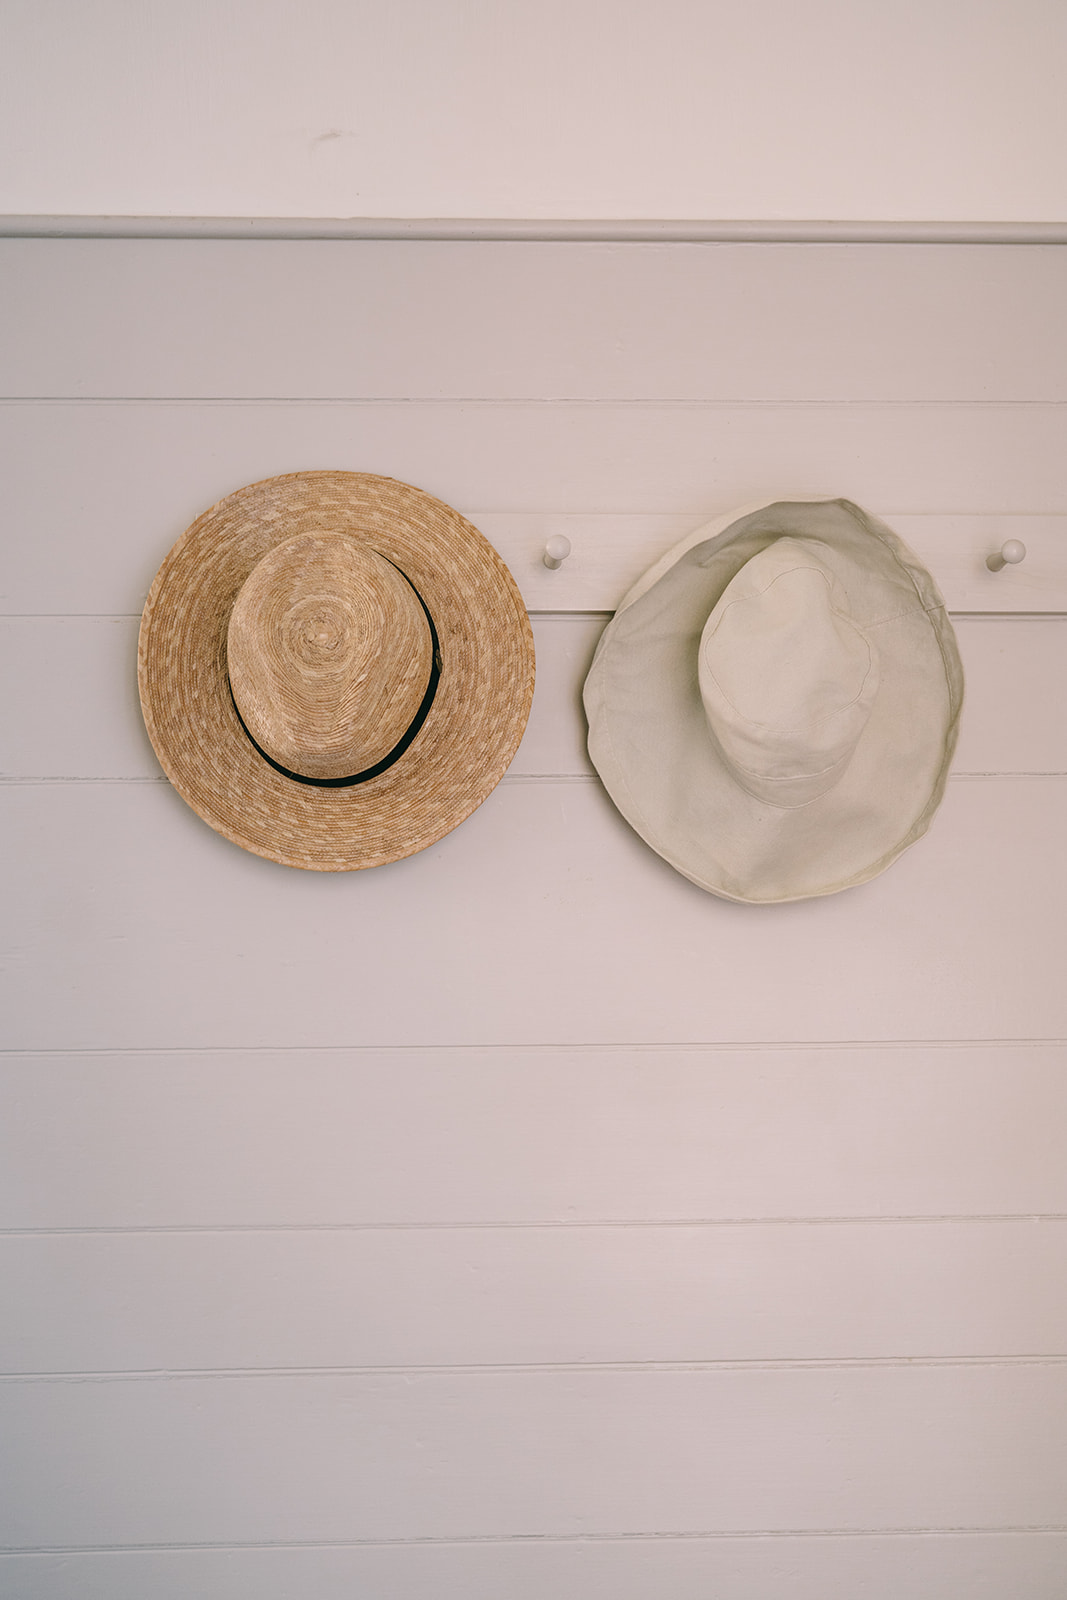 One wicker hat and one white hat hanging on hat rack